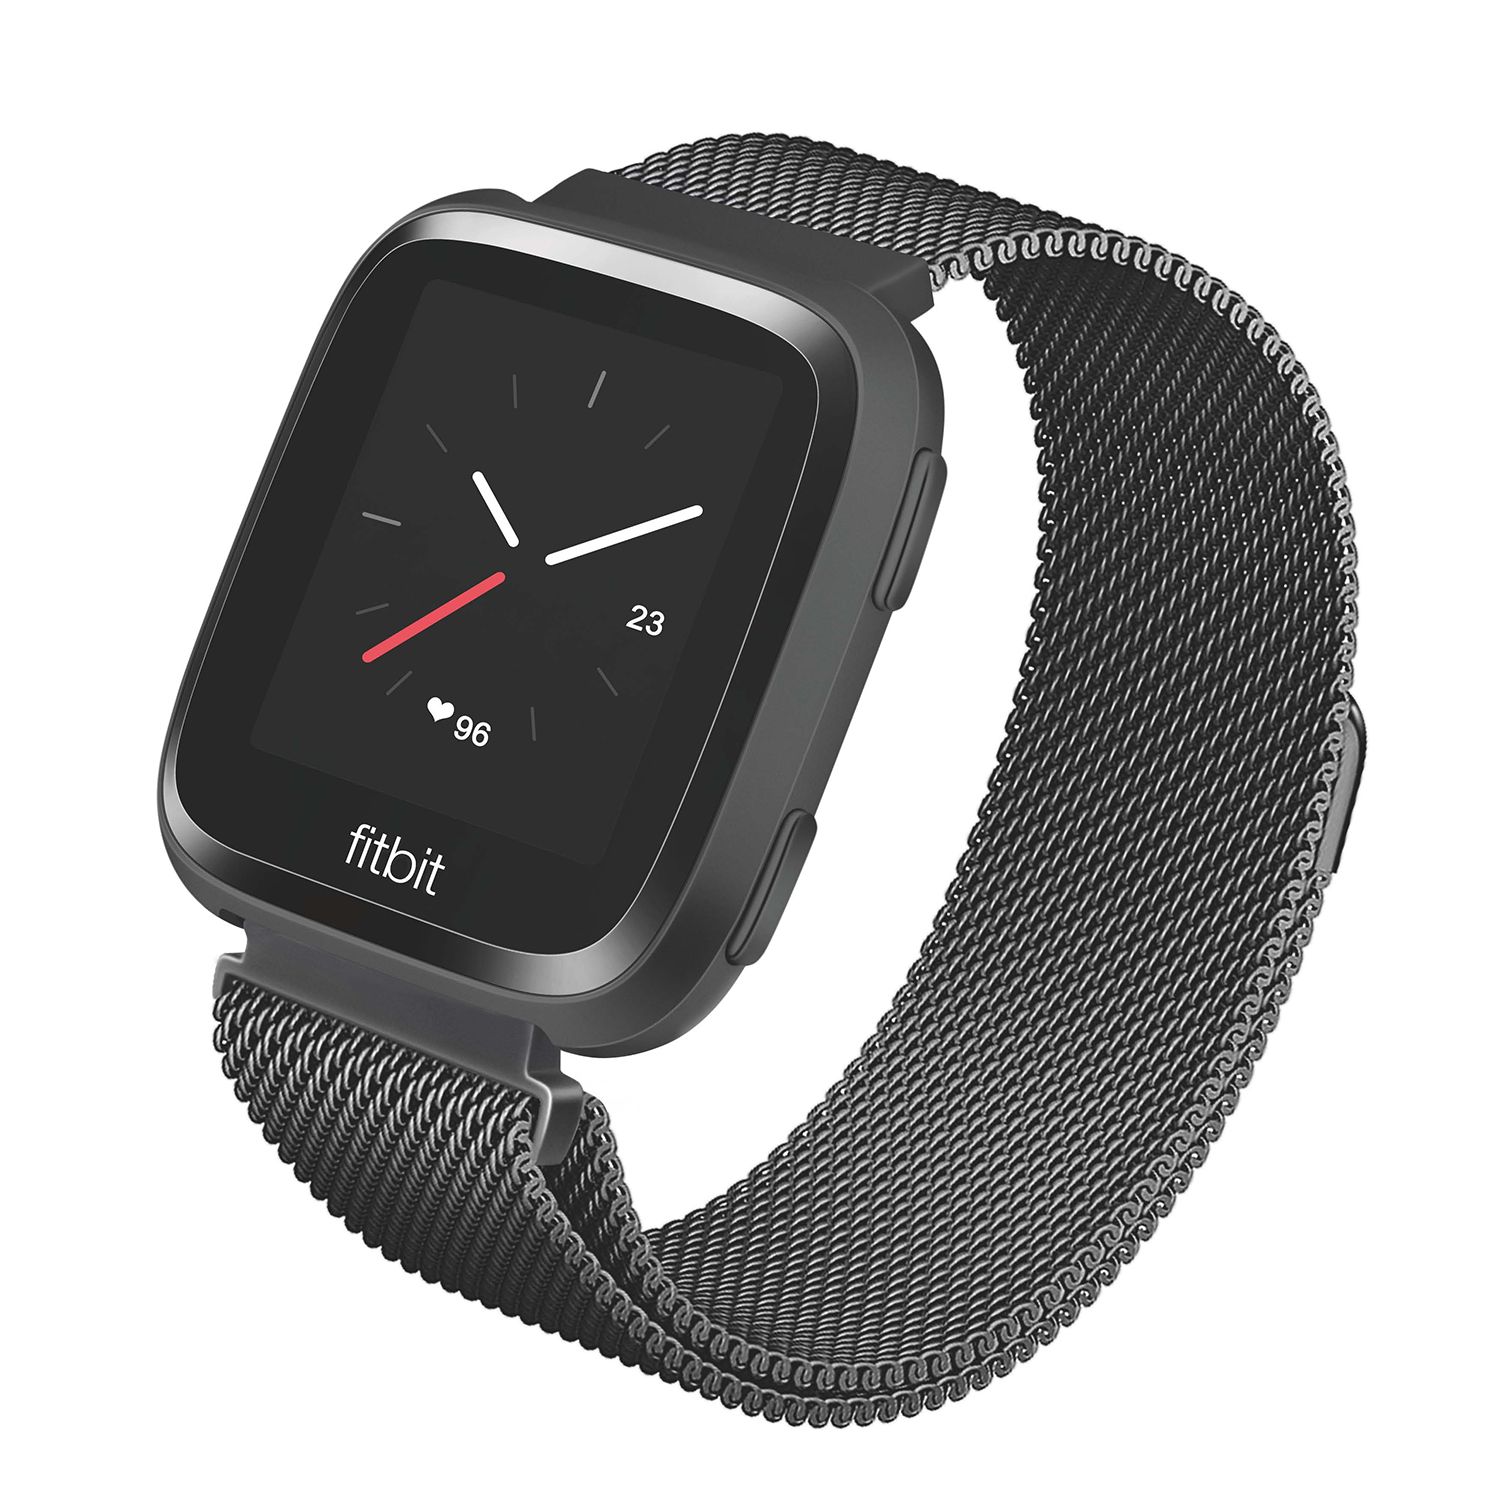 WITHit Mesh Band for Fitbit Versa